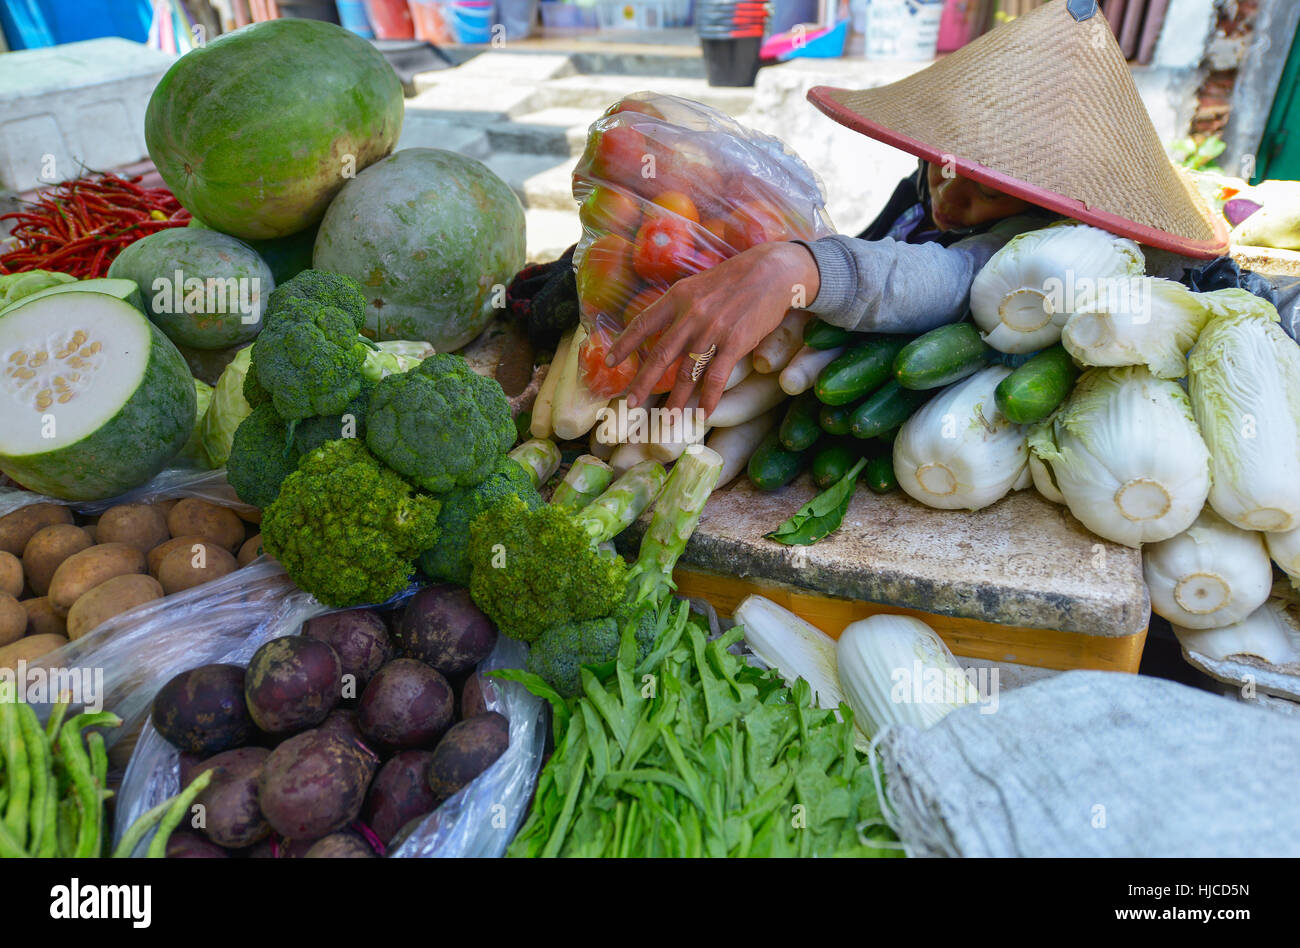 Jakarta, Java, Indonesia - August 25: Unidentified woman selling food at a Jakarta market on August 25, 2016 in Java, Indonesia Stock Photo